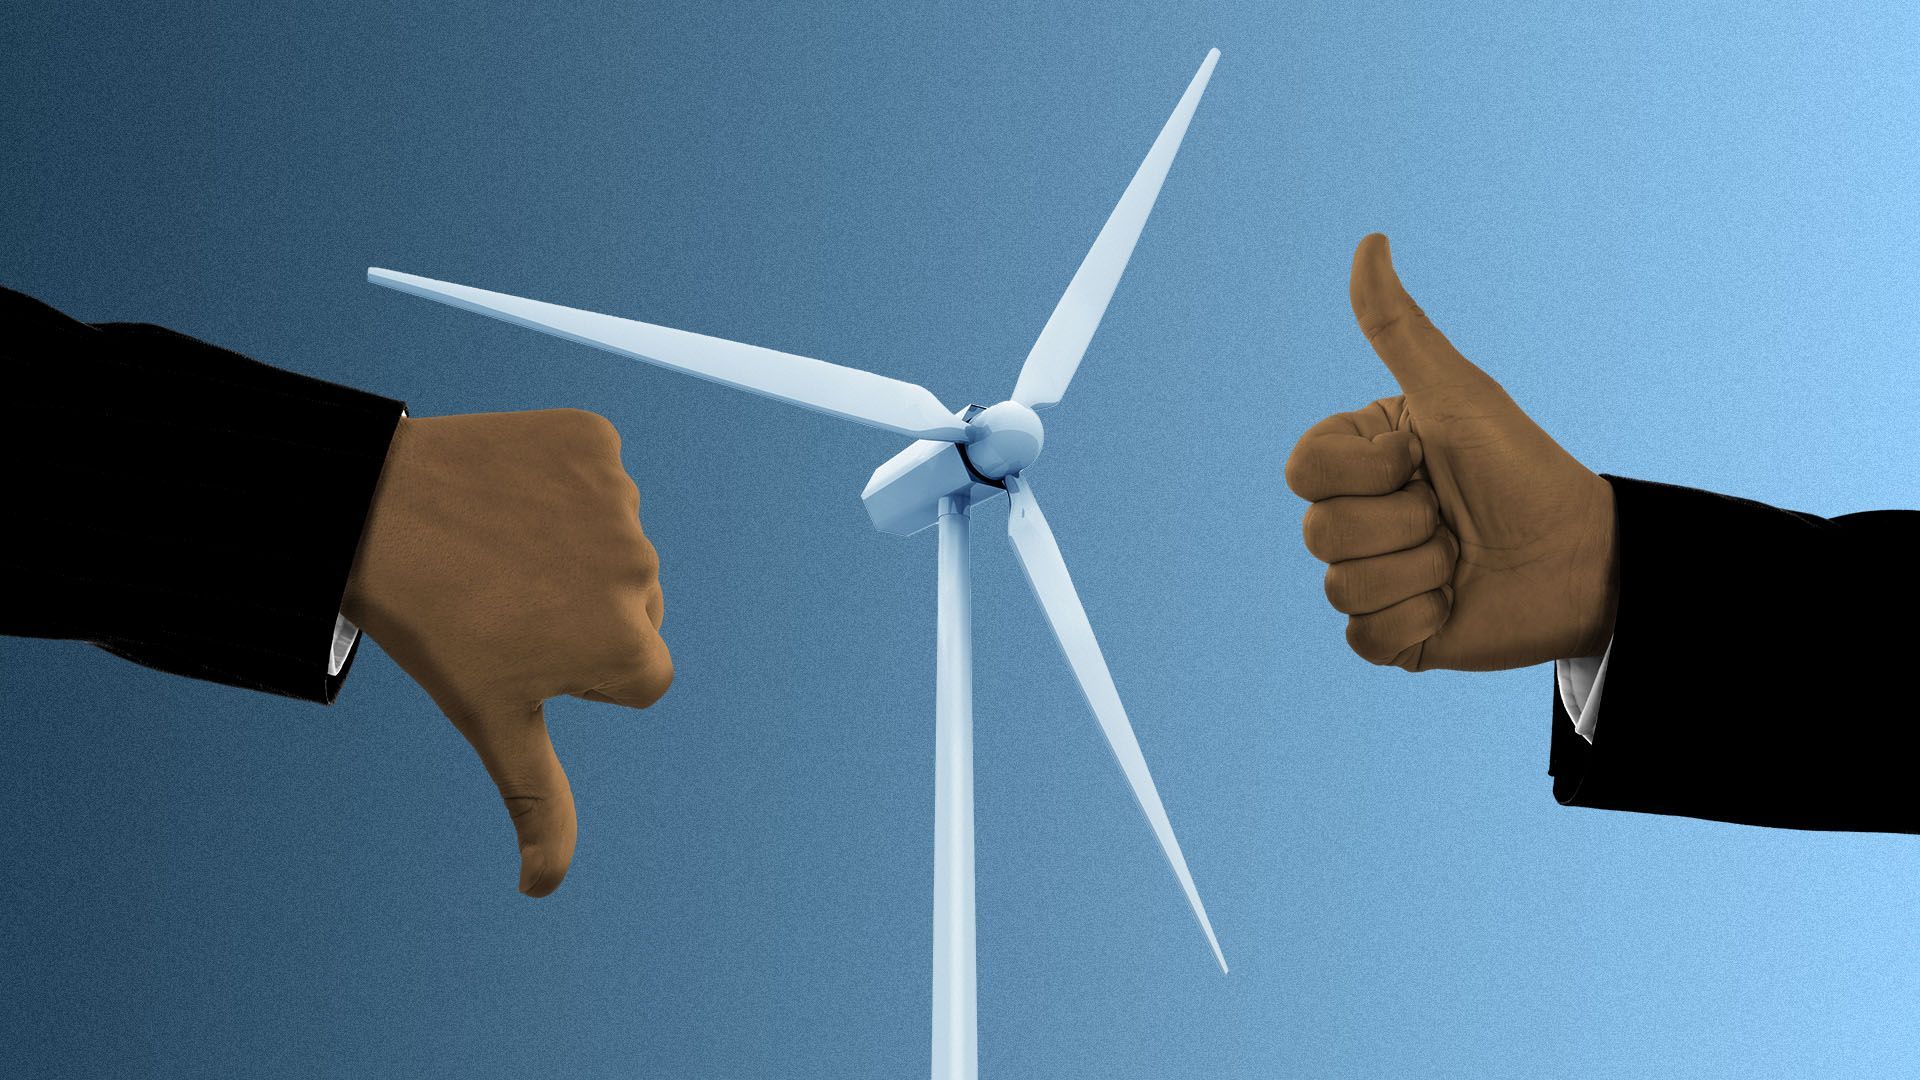 Illustration of a wind turbine with a thumbs up on one side and a thumbs down on the other